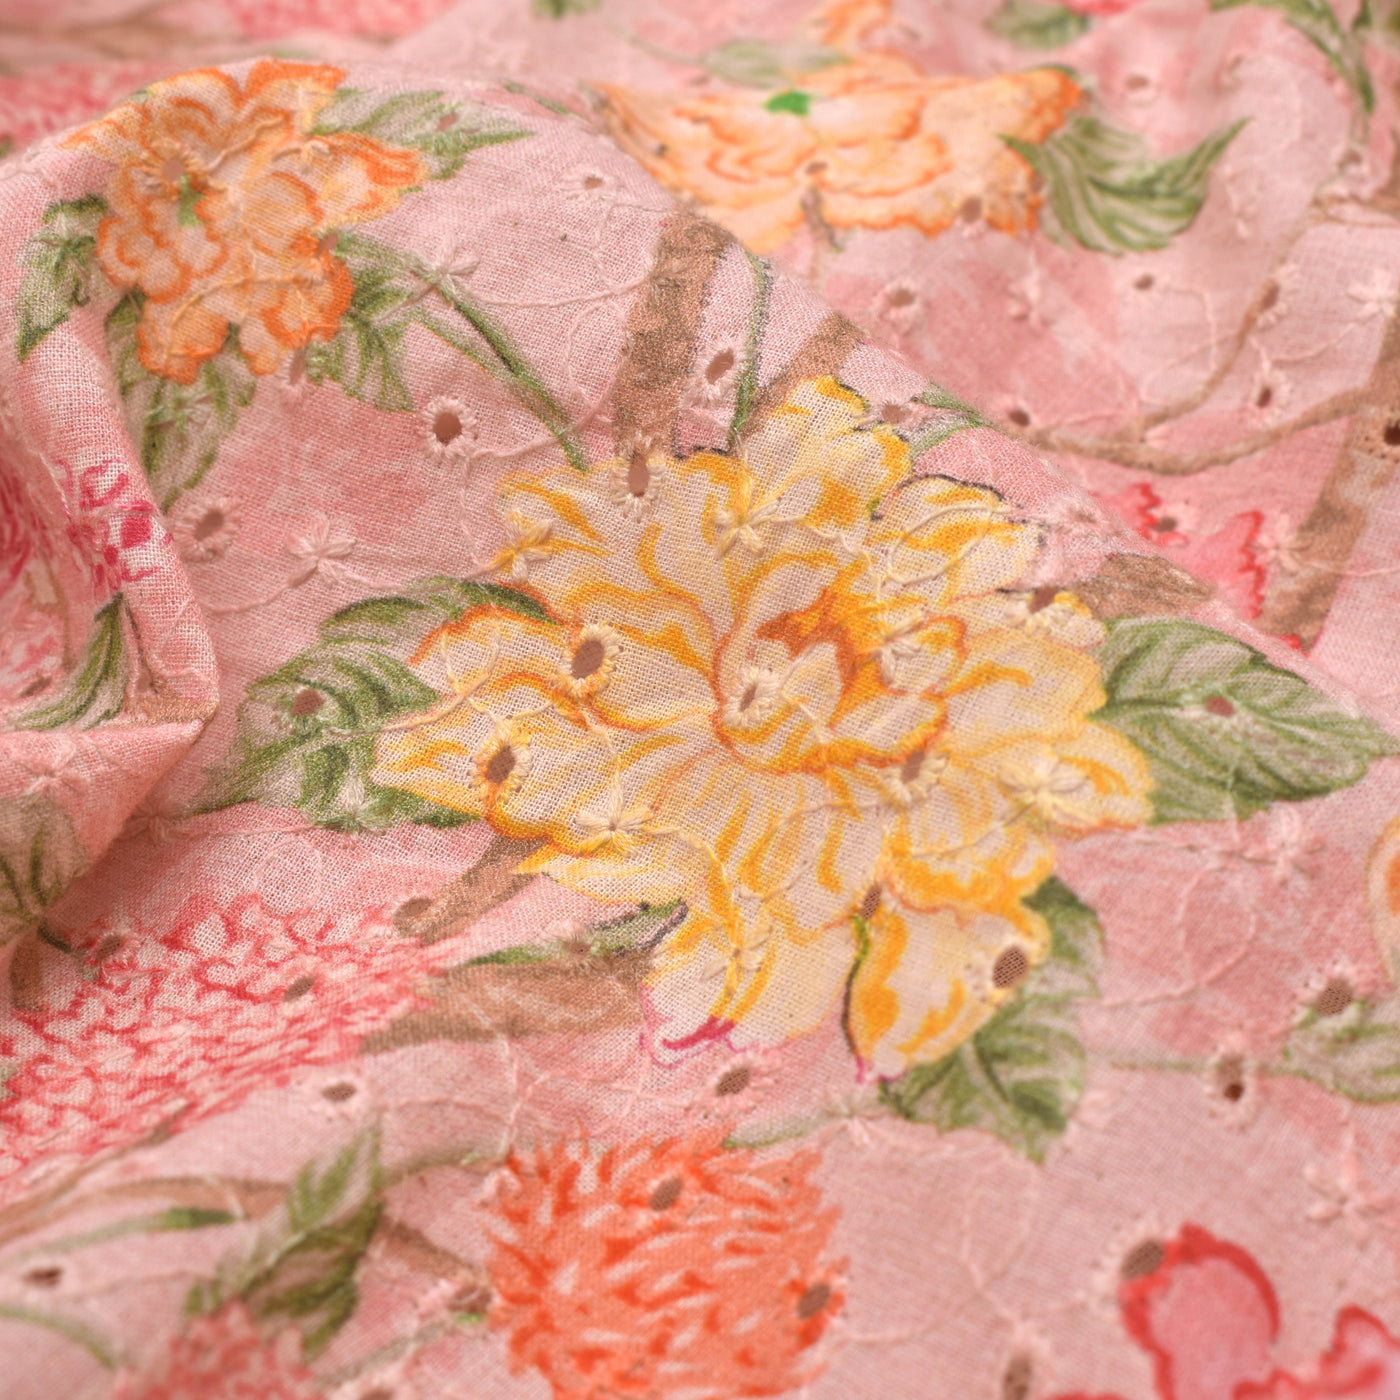 Peach Hakoba Cotton Fabric with Floral Design